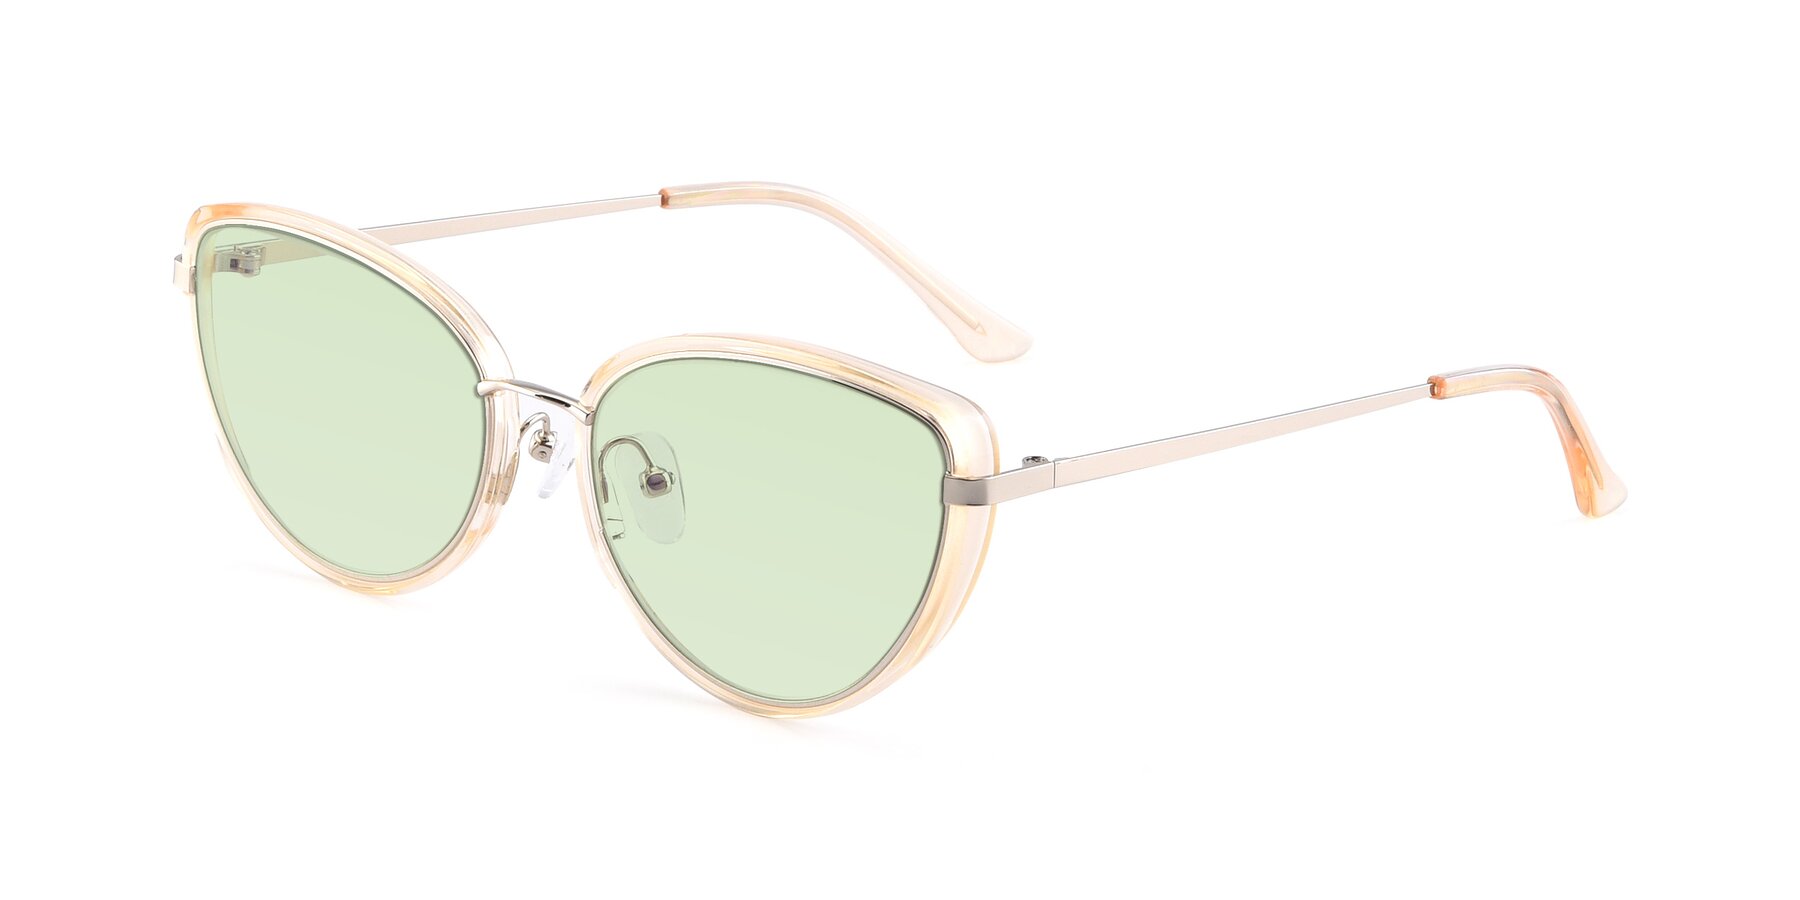 Angle of 17706 in Transparent Caramel-Silver with Light Green Tinted Lenses